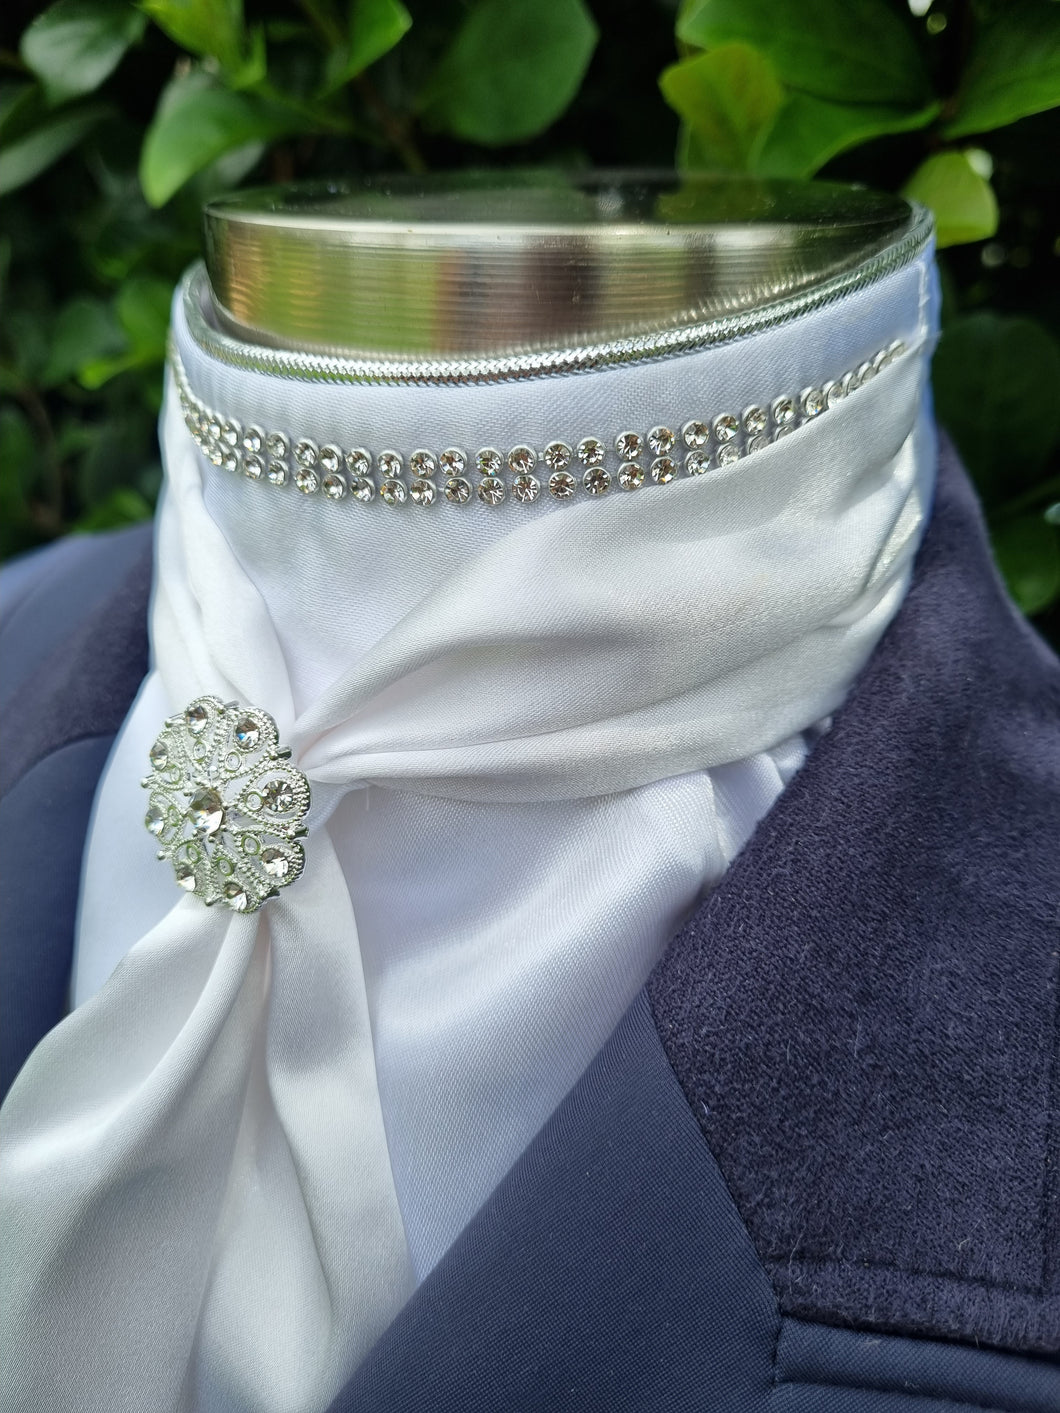 ERA Elle Stock Tie - Soft Ties with Clear Crystal trim, piping and Brooch